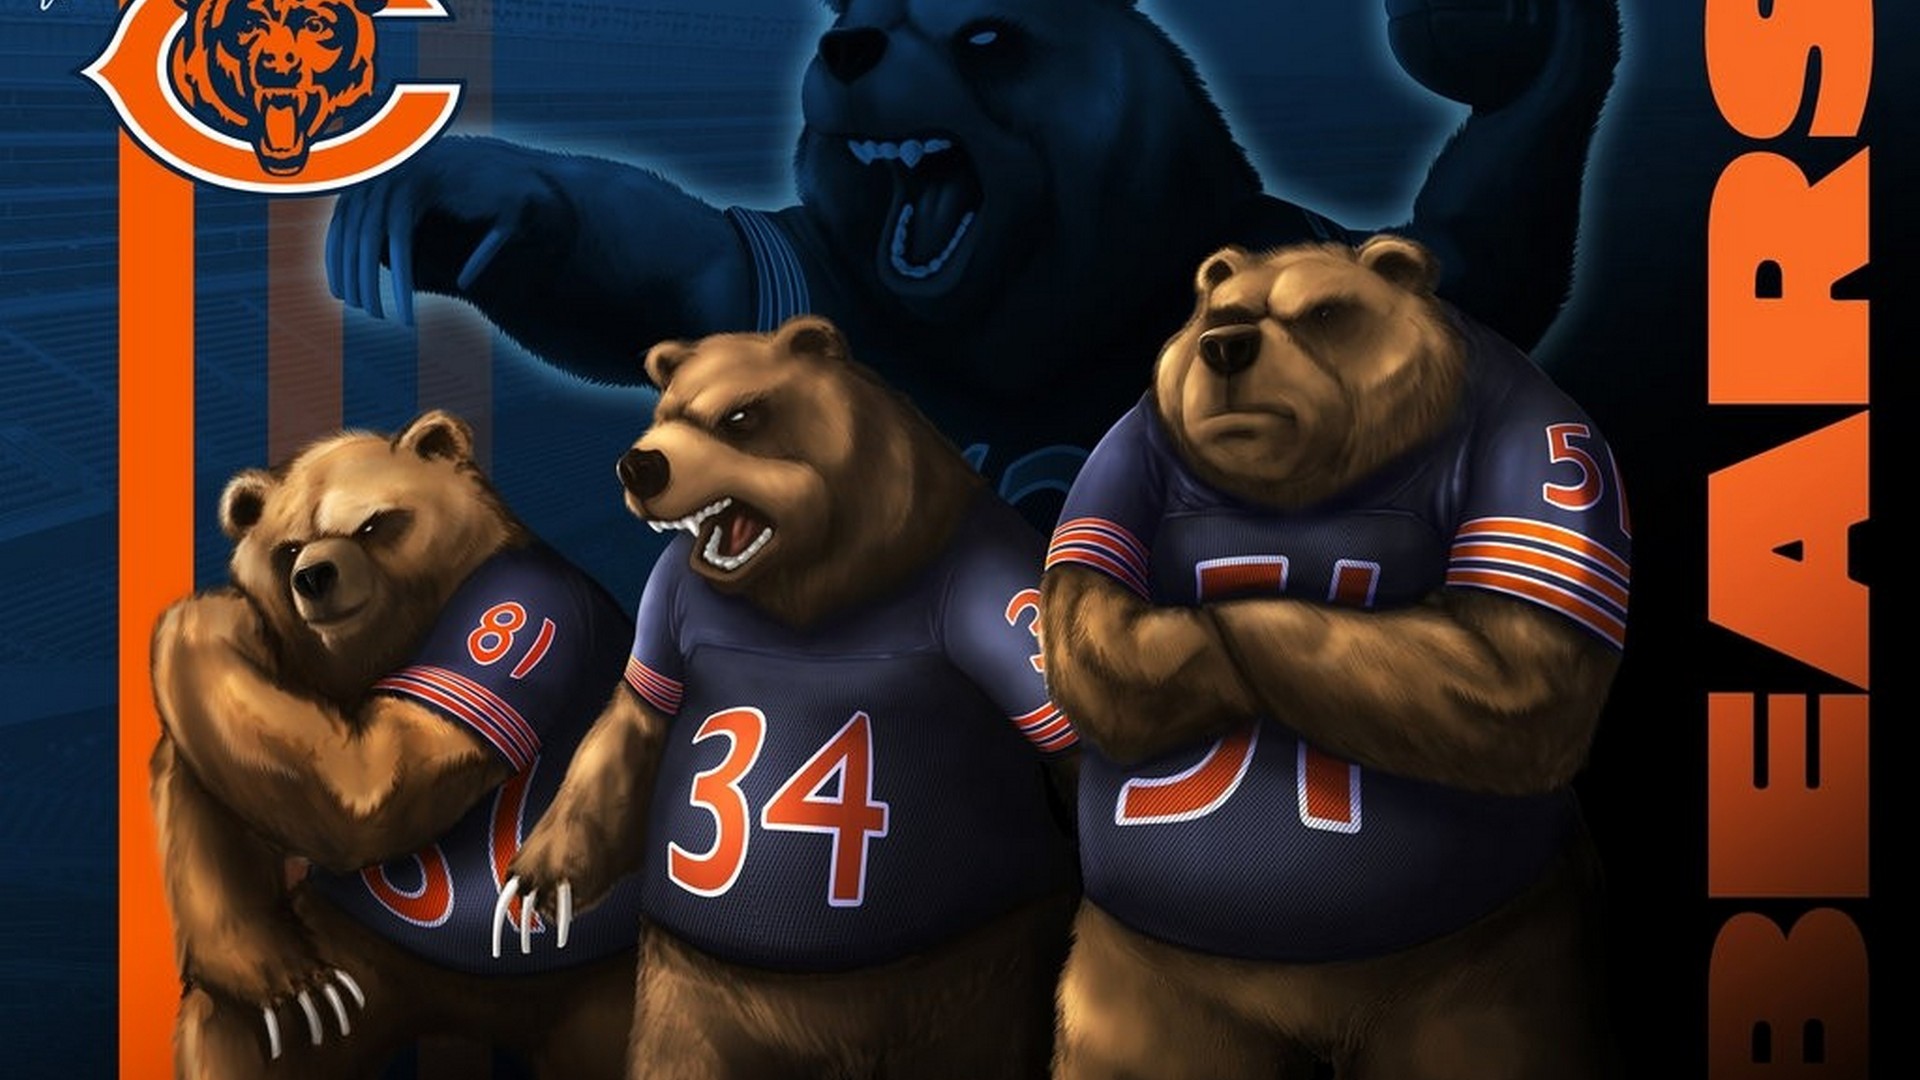 HD Backgrounds Chicago Bears With Resolution 1920X1080